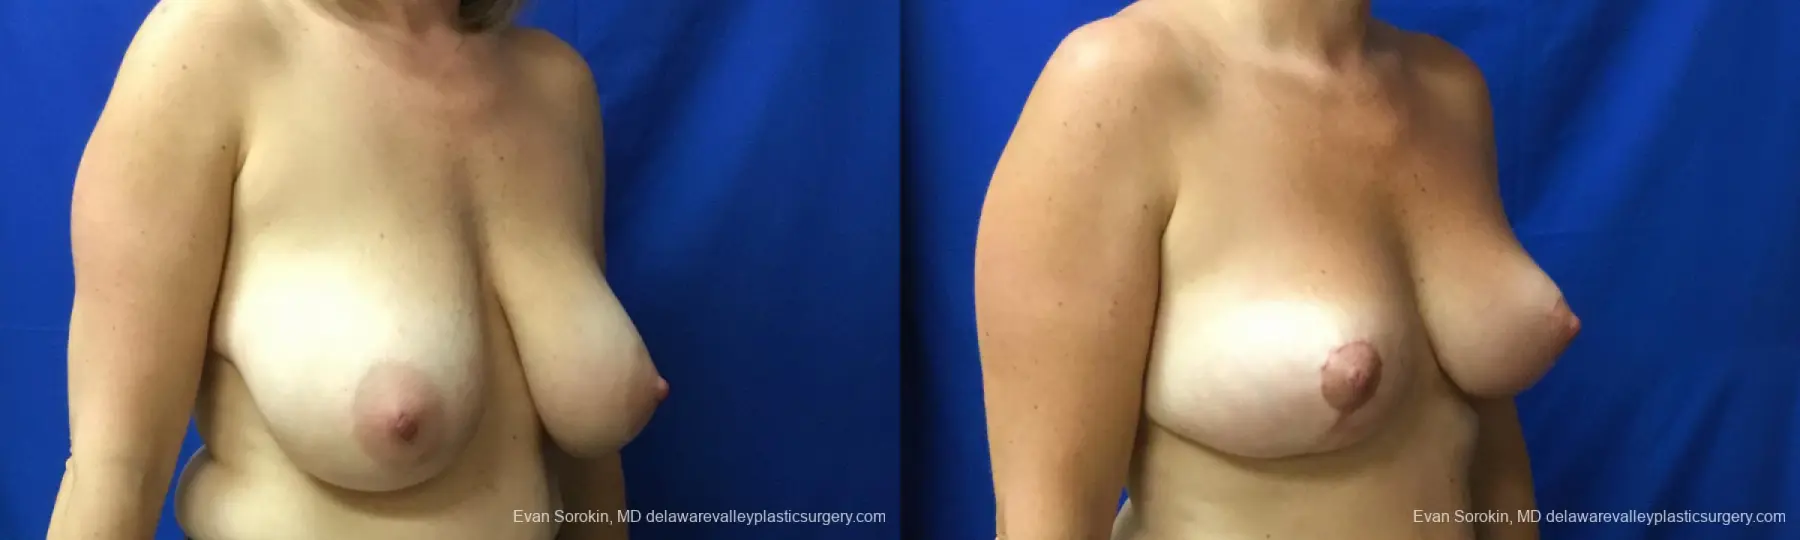 Philadelphia Breast Reduction 12512 - Before and After 2